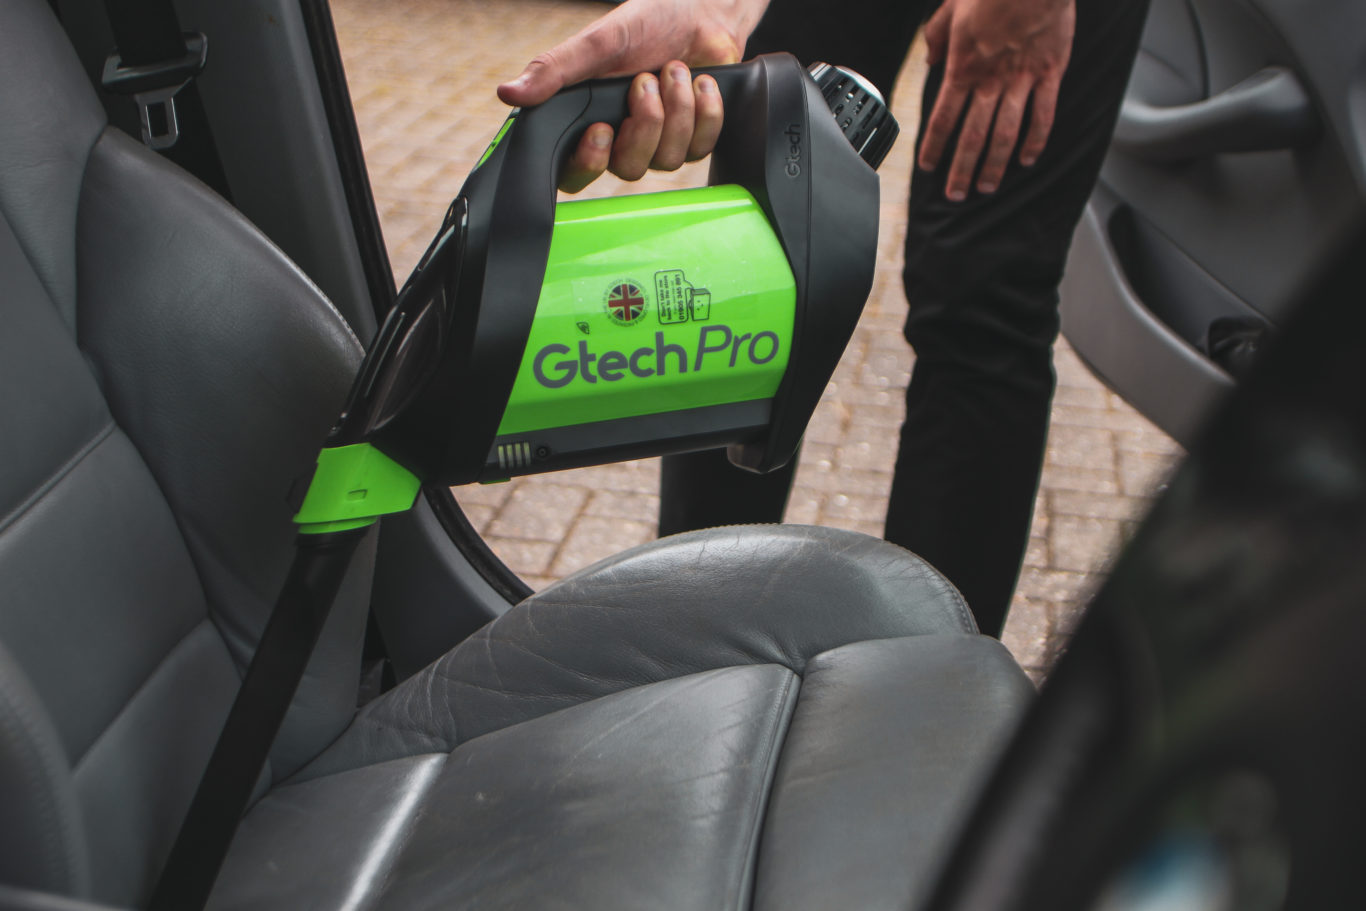 The Gtech packs plenty of power for vacuuming the car